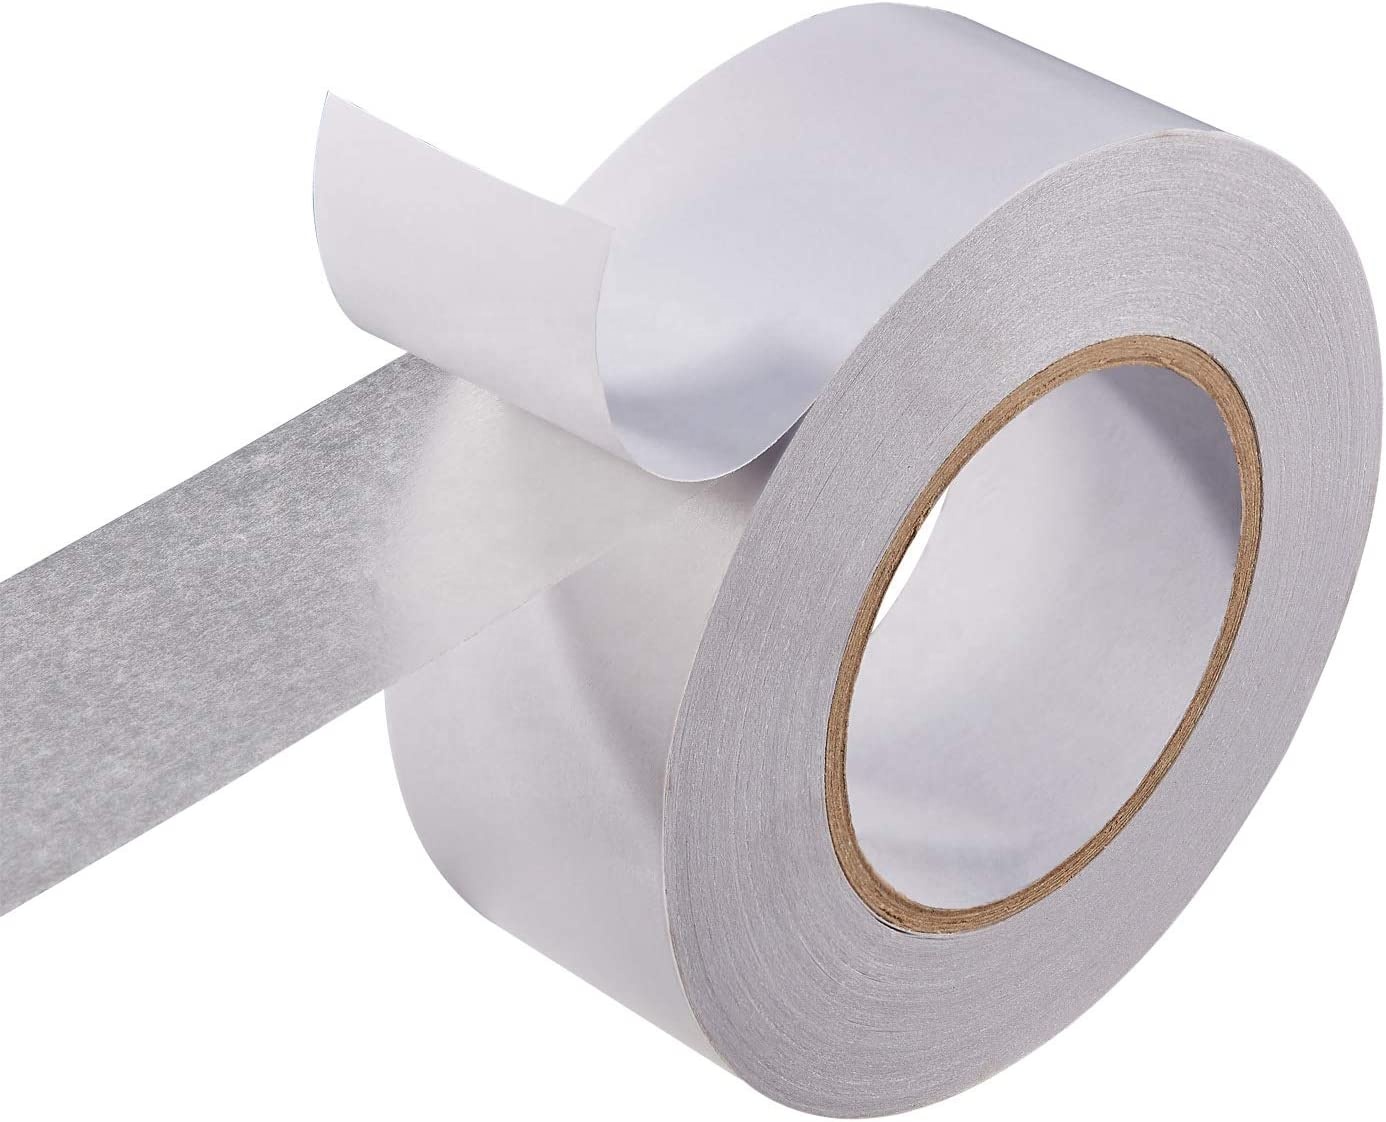 Characteristics of Double Sided Tape